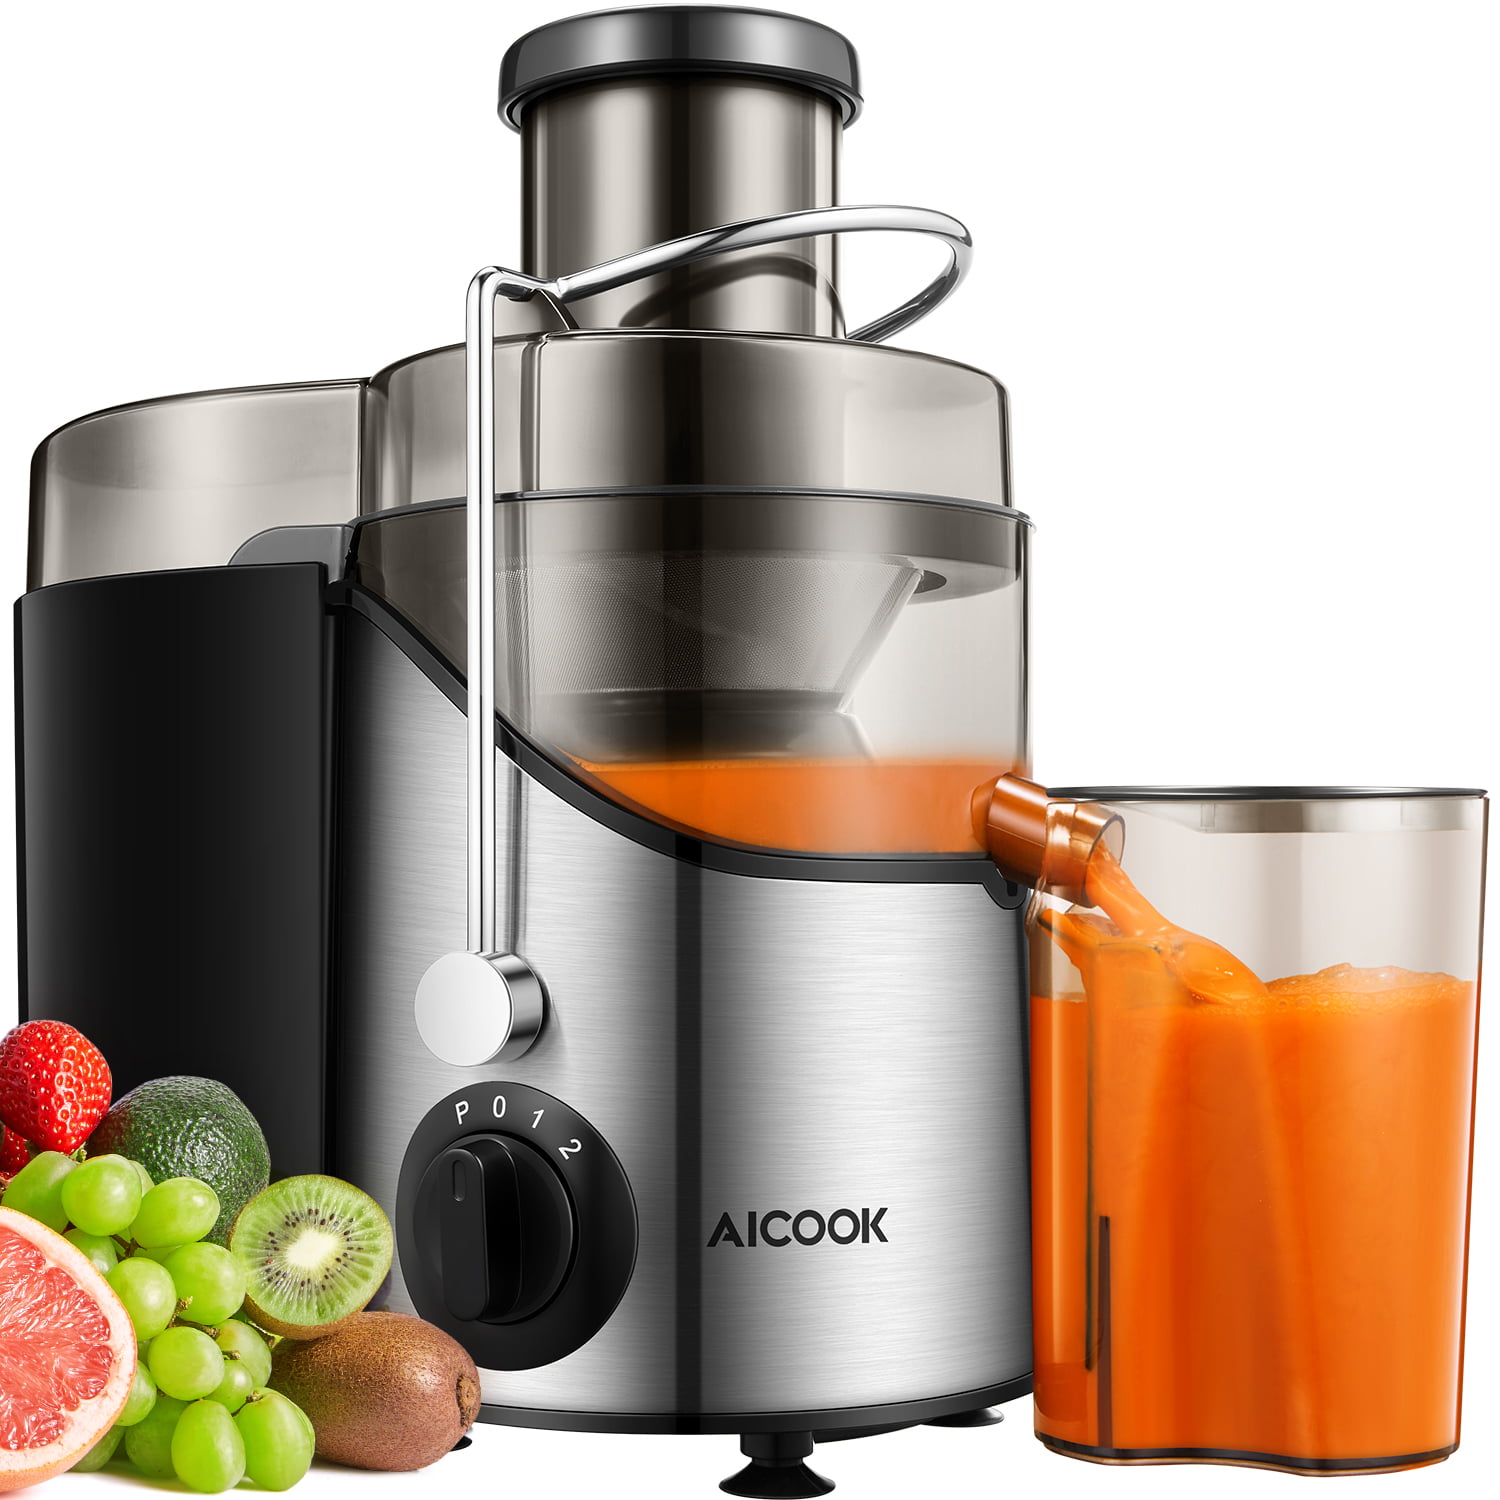 N\C Stainless Steel Juicer Machine Extractor Fountain Cold Maker Centrifugal Fountain with 3 Speed 800W High Power Juice Fruit Vegetable Easy Clean Non-Slip Feet 